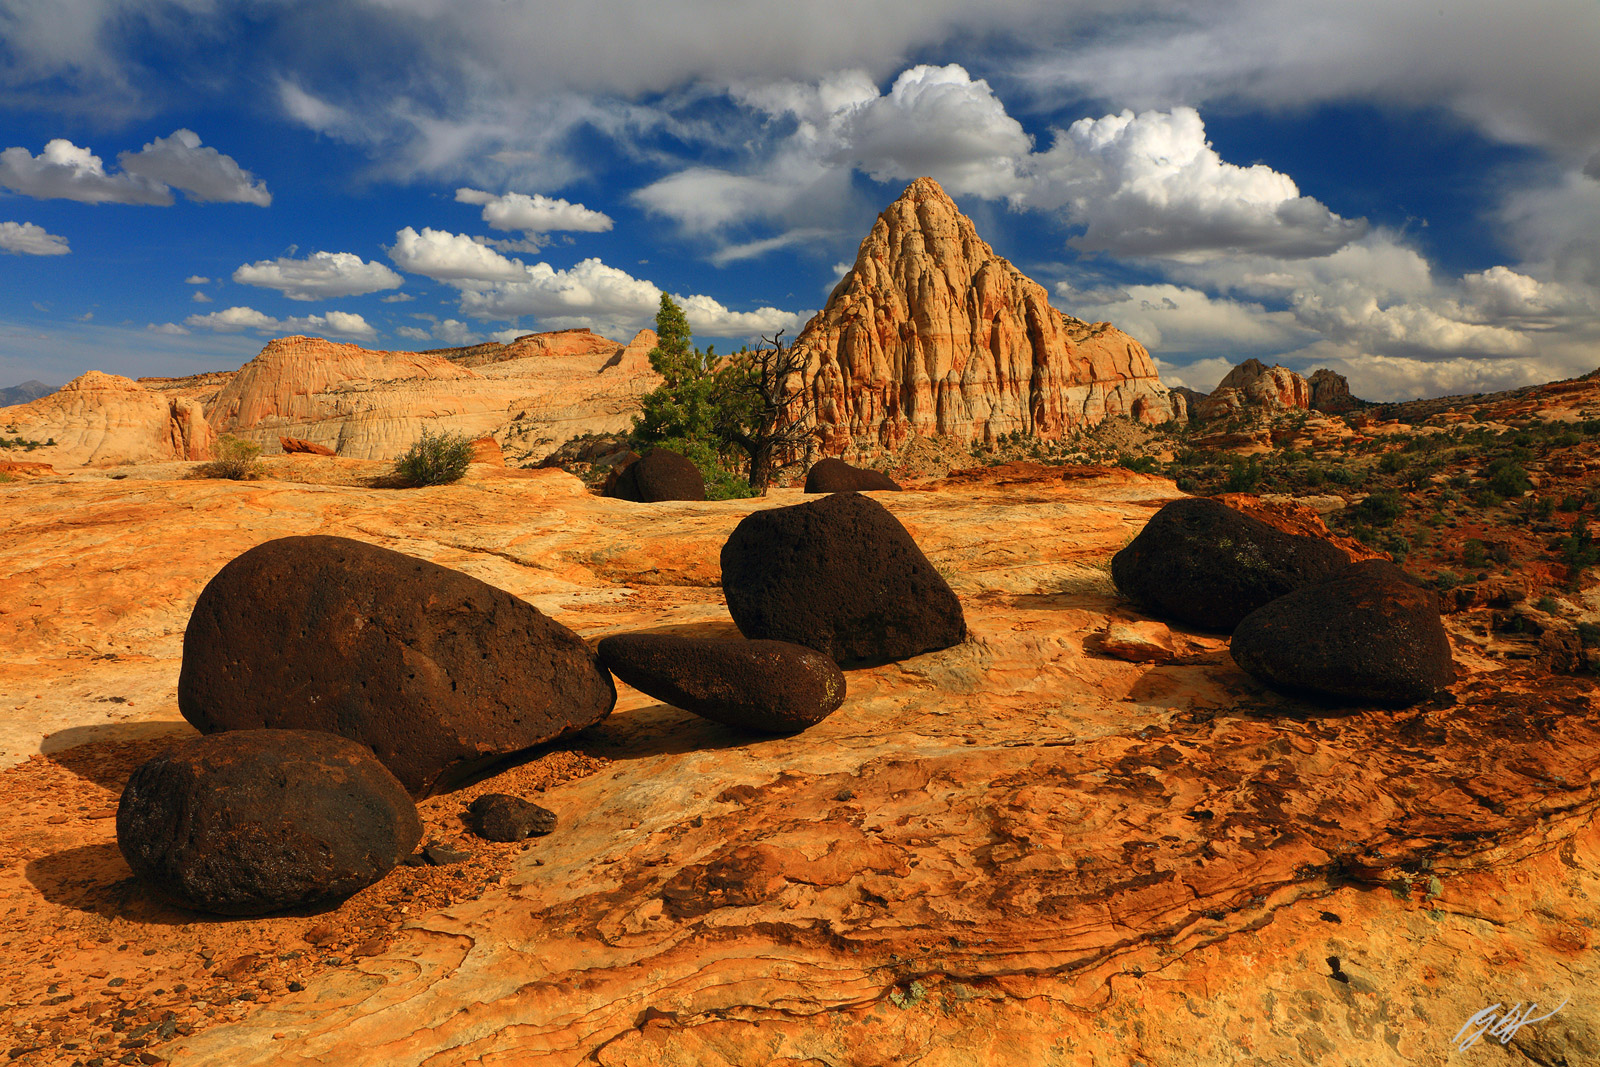 Giant Volcanic Boulders and Pectols Pyromid in Capital Reef National Park in Utah